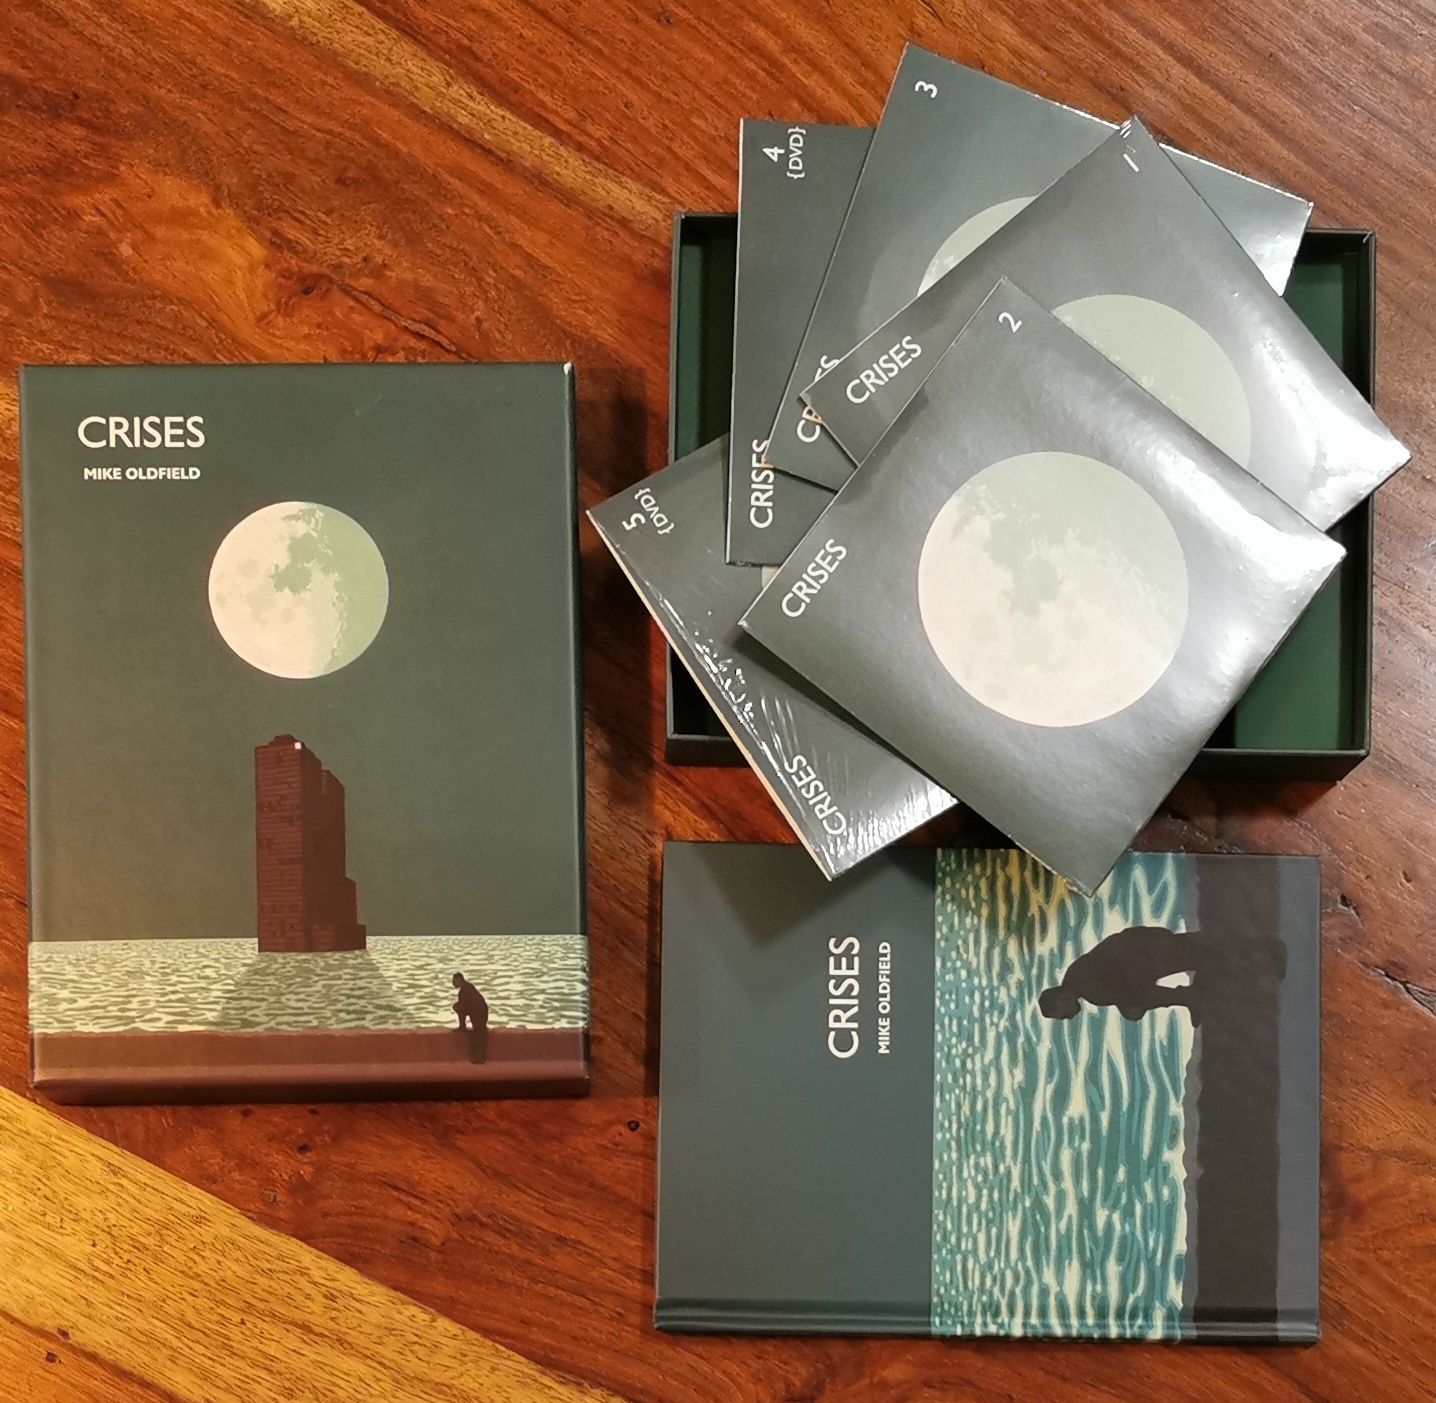 Mike Oldfield - Crises 3 CD / 2 DVD Super Deluxe Edition E 